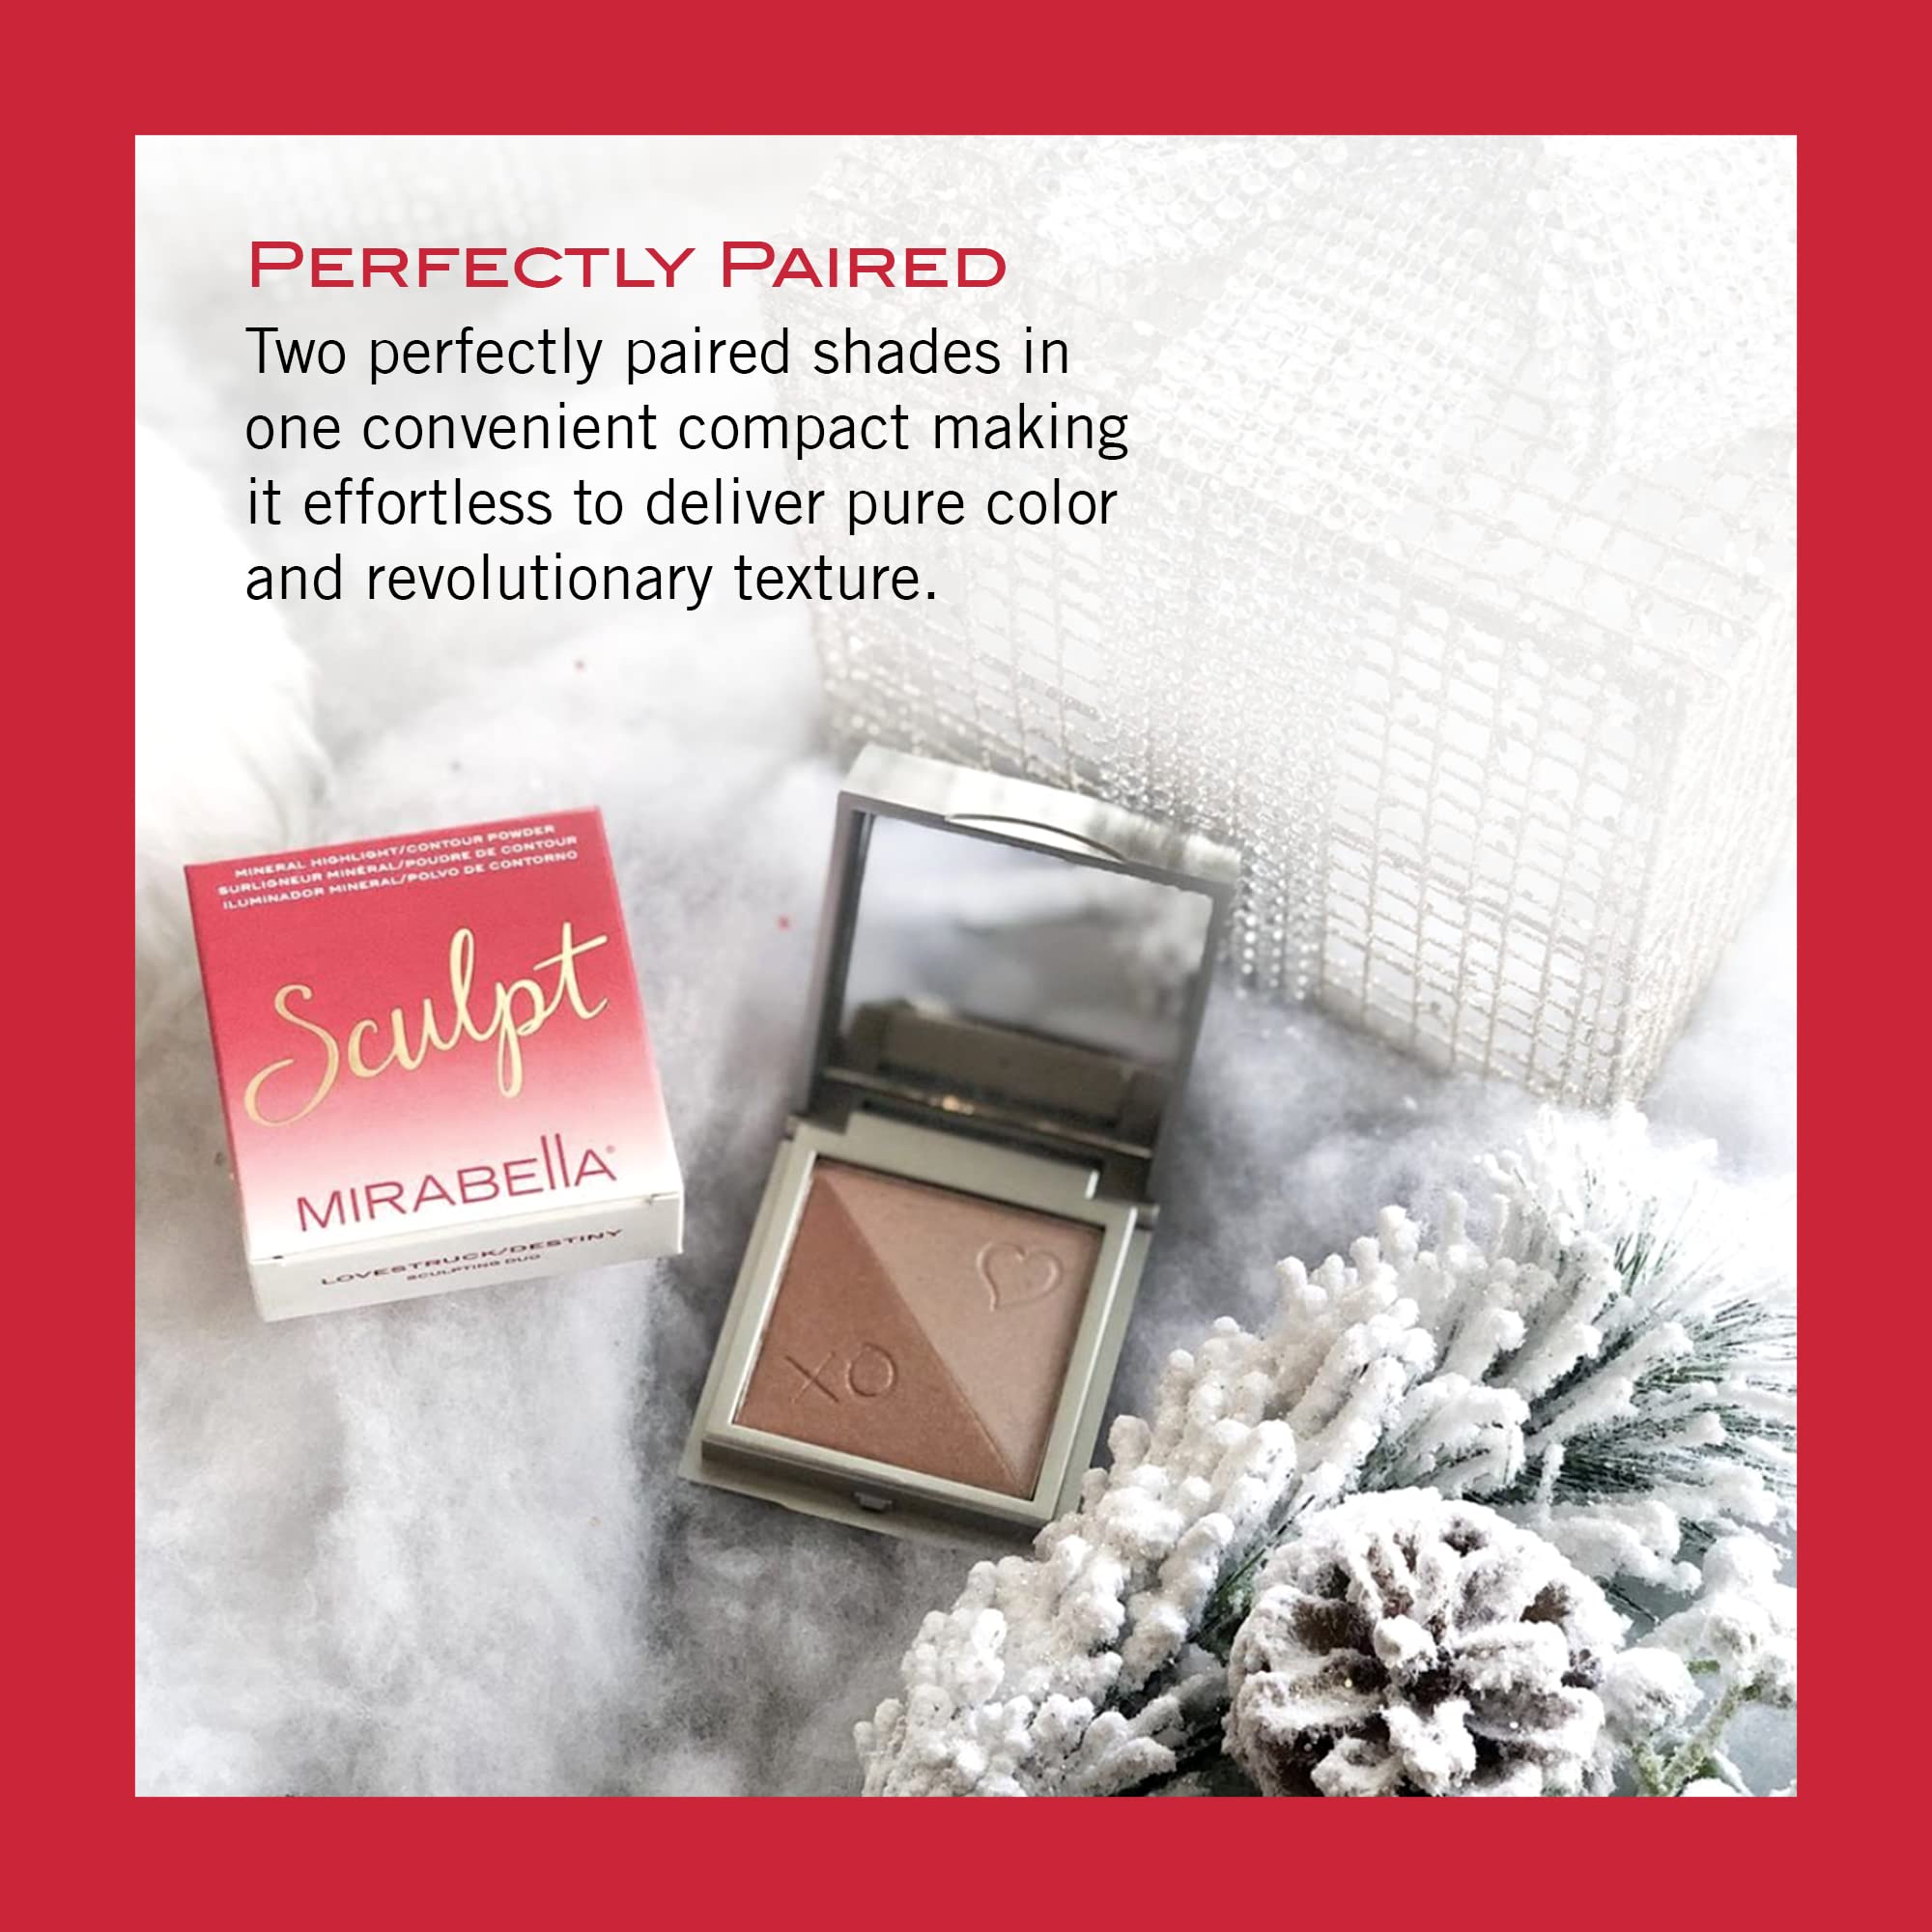 Mirabella Sculpt Contour and Bronzer Duo, Fate/Serendipity - Blendable, Mineral-Based Pressed Powders, Matte & Shimmer Shades - Sculpt & Define with Bronzing, Highlighting & Illuminating Colors